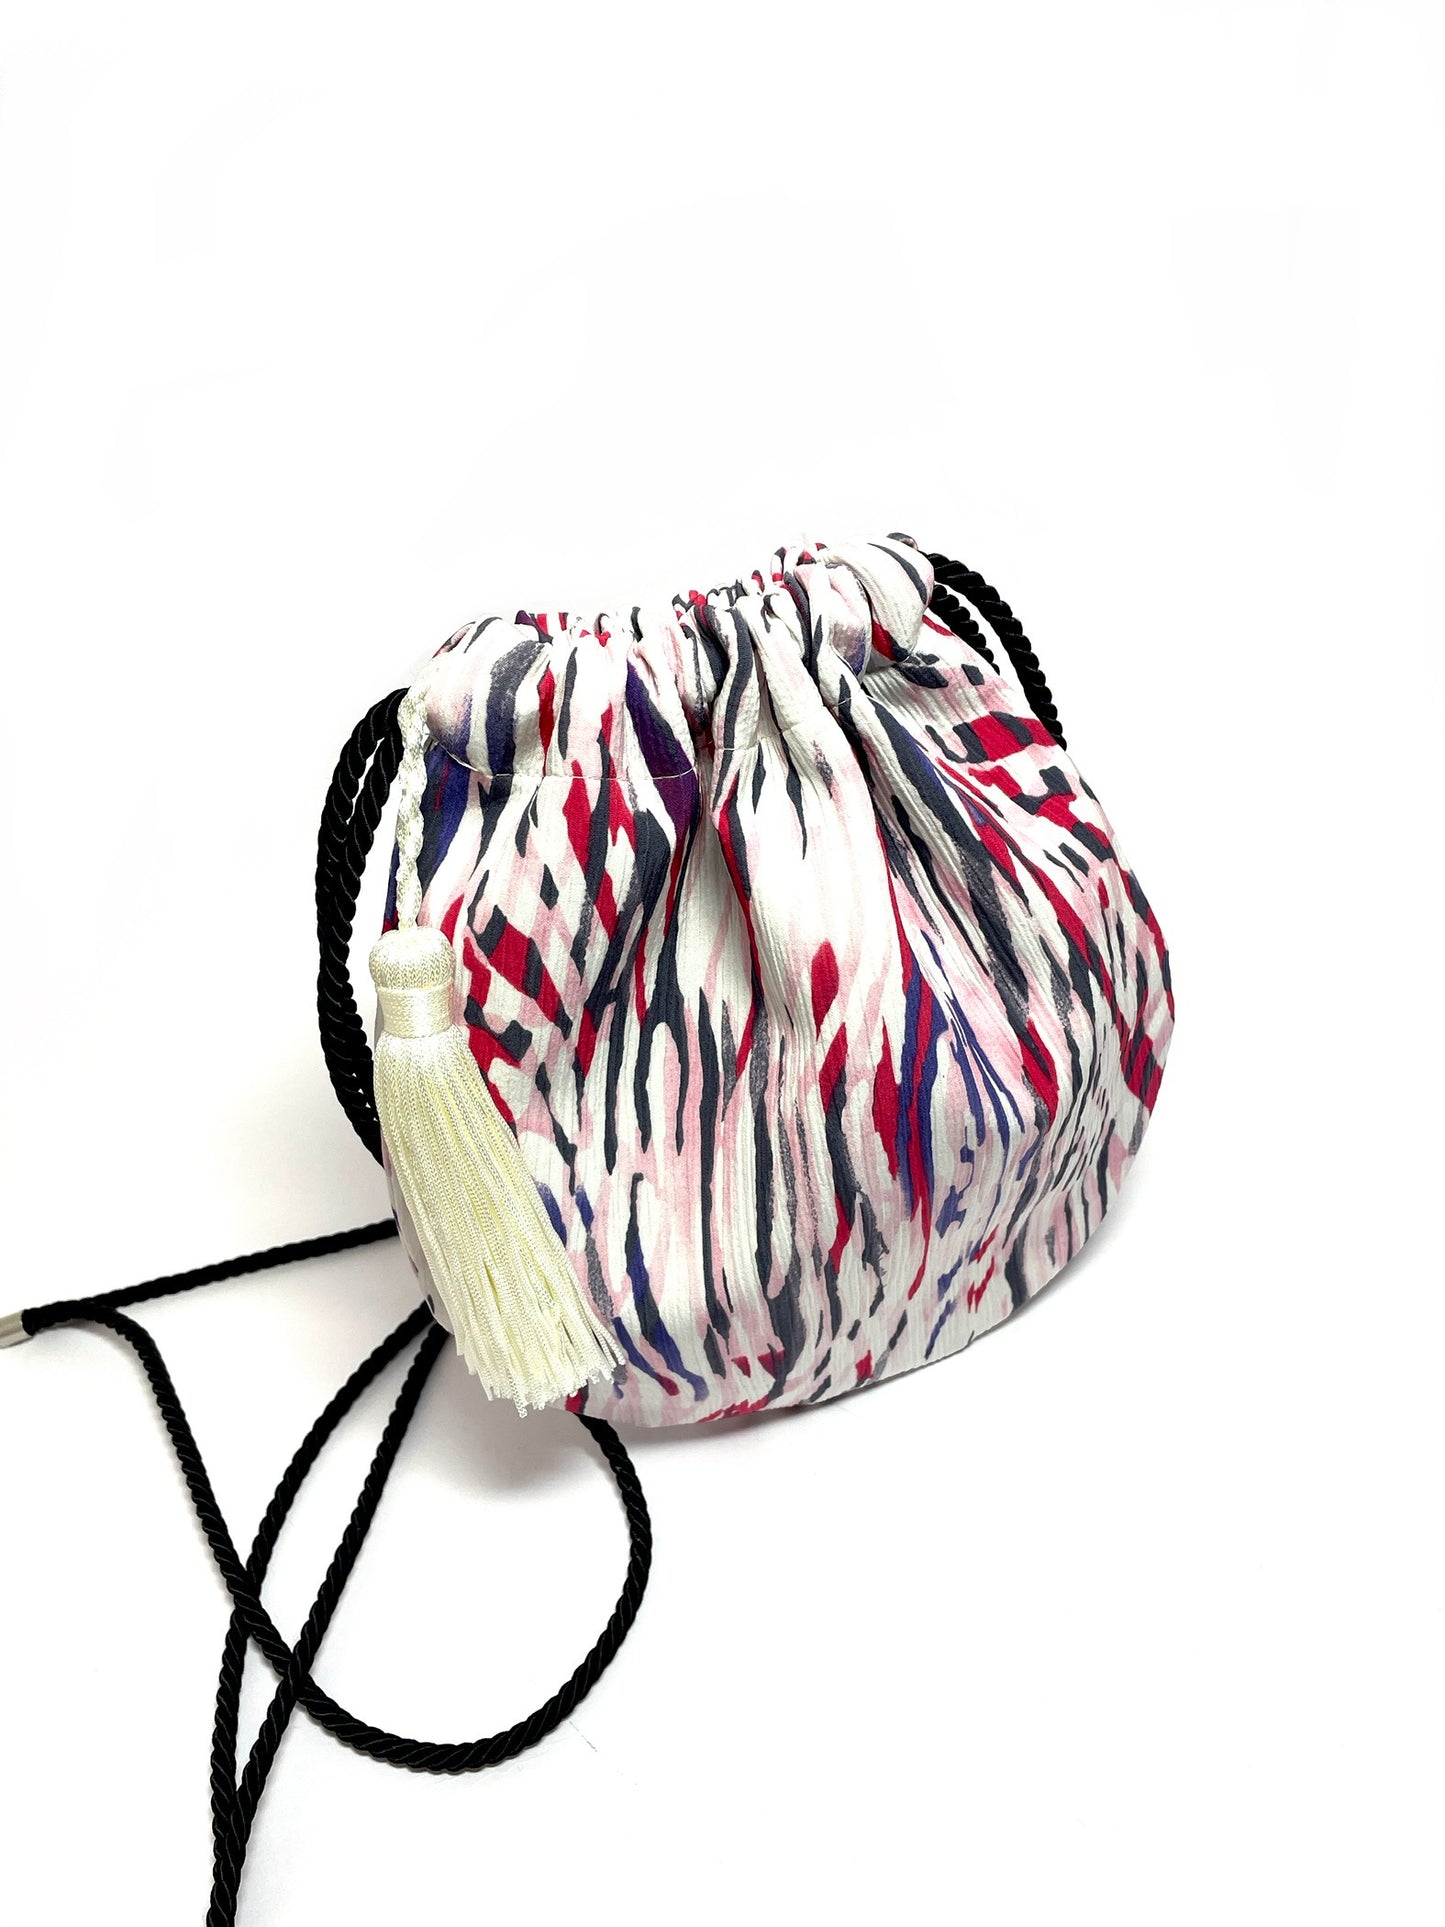 Colorful bucket bag with a tassel